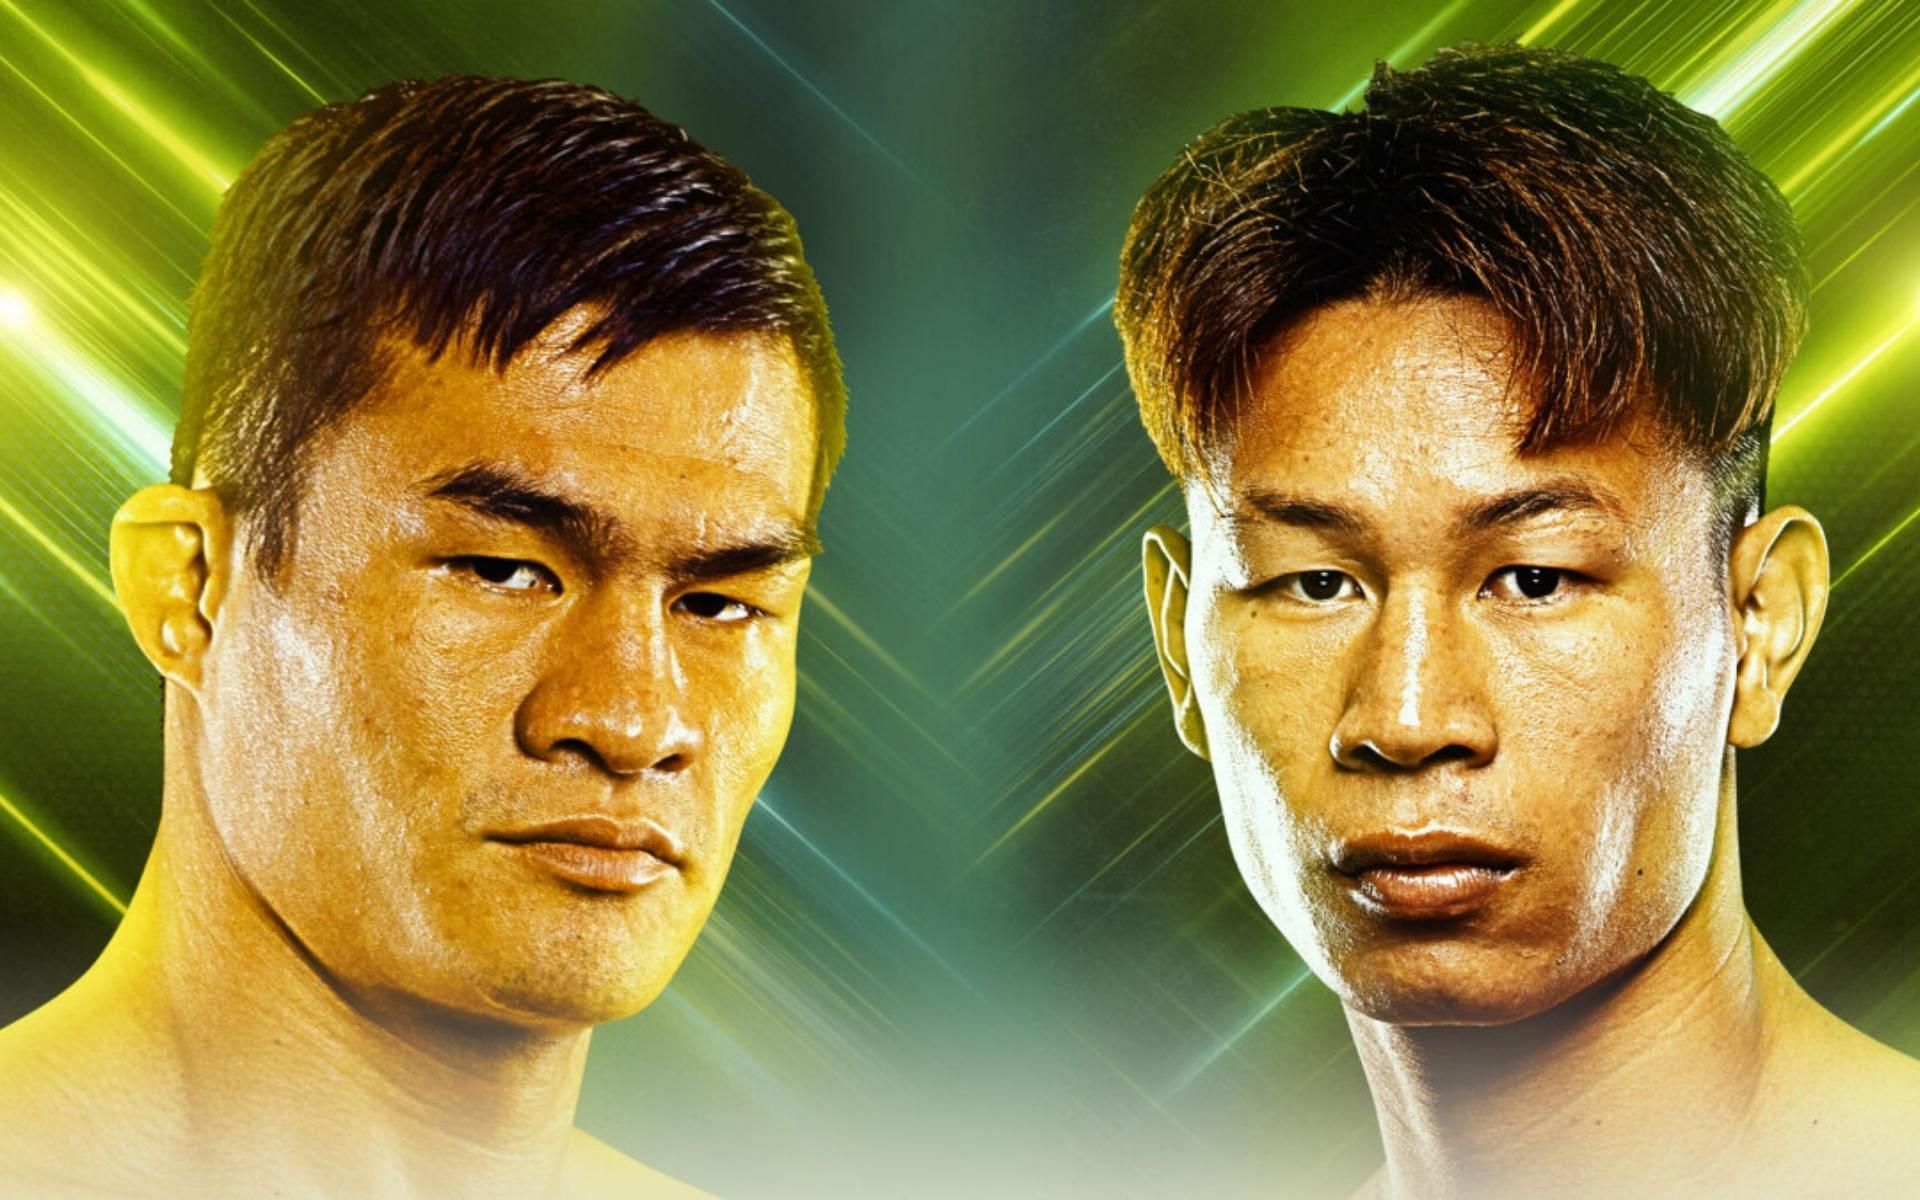 Saemapetch (left) faces ONE newcomer Rittewada (right) in the main event of ONE: NEXTGEN II on November 12. (Photo courtesy of ONE Championship)